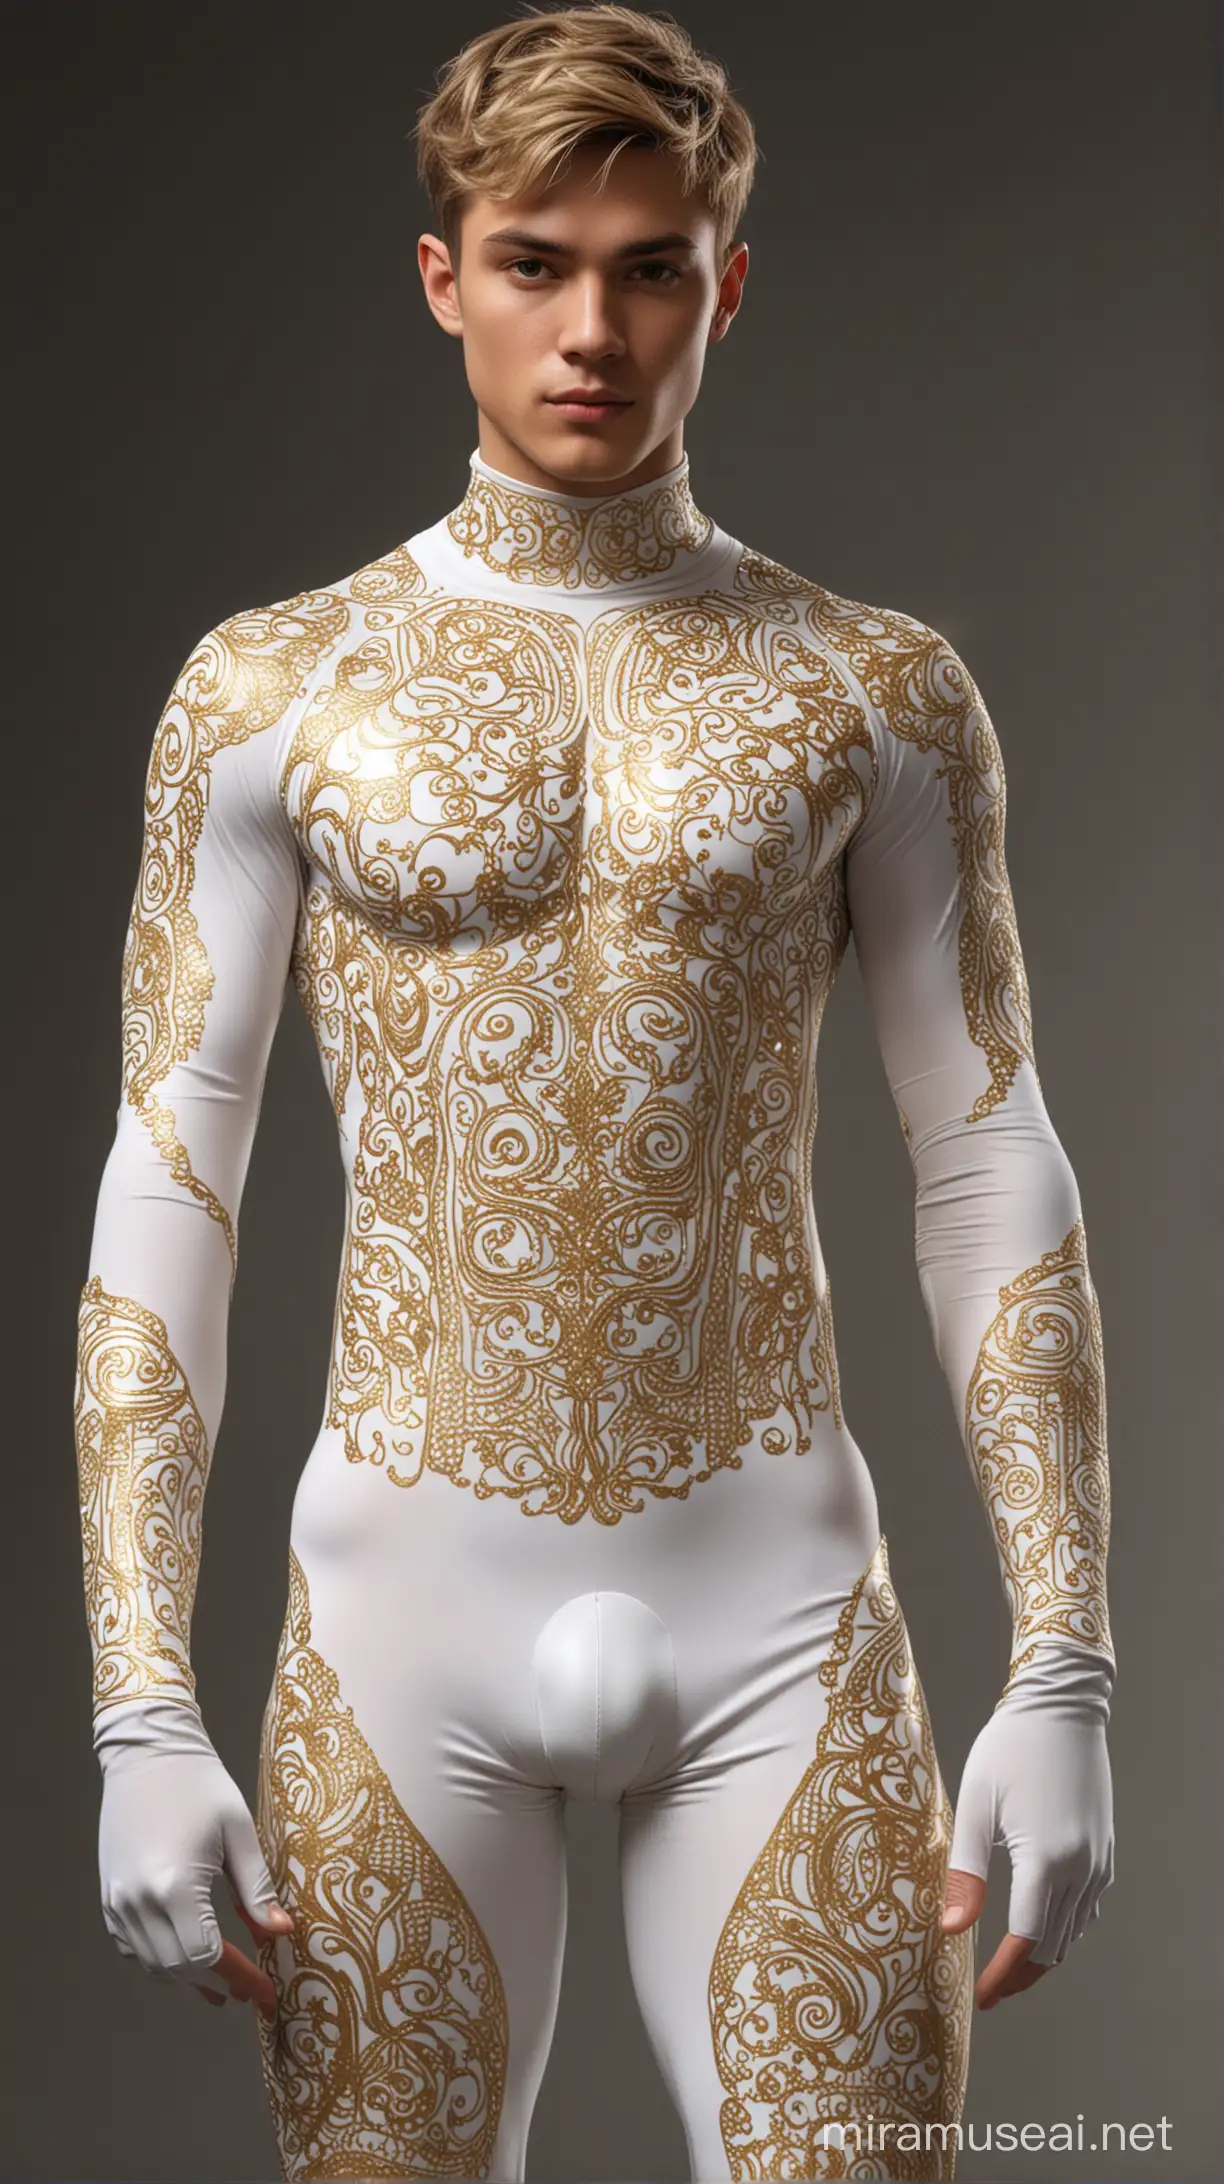 Celestial Teng Handsome Zayne in White and Gold Biomorphic Overall